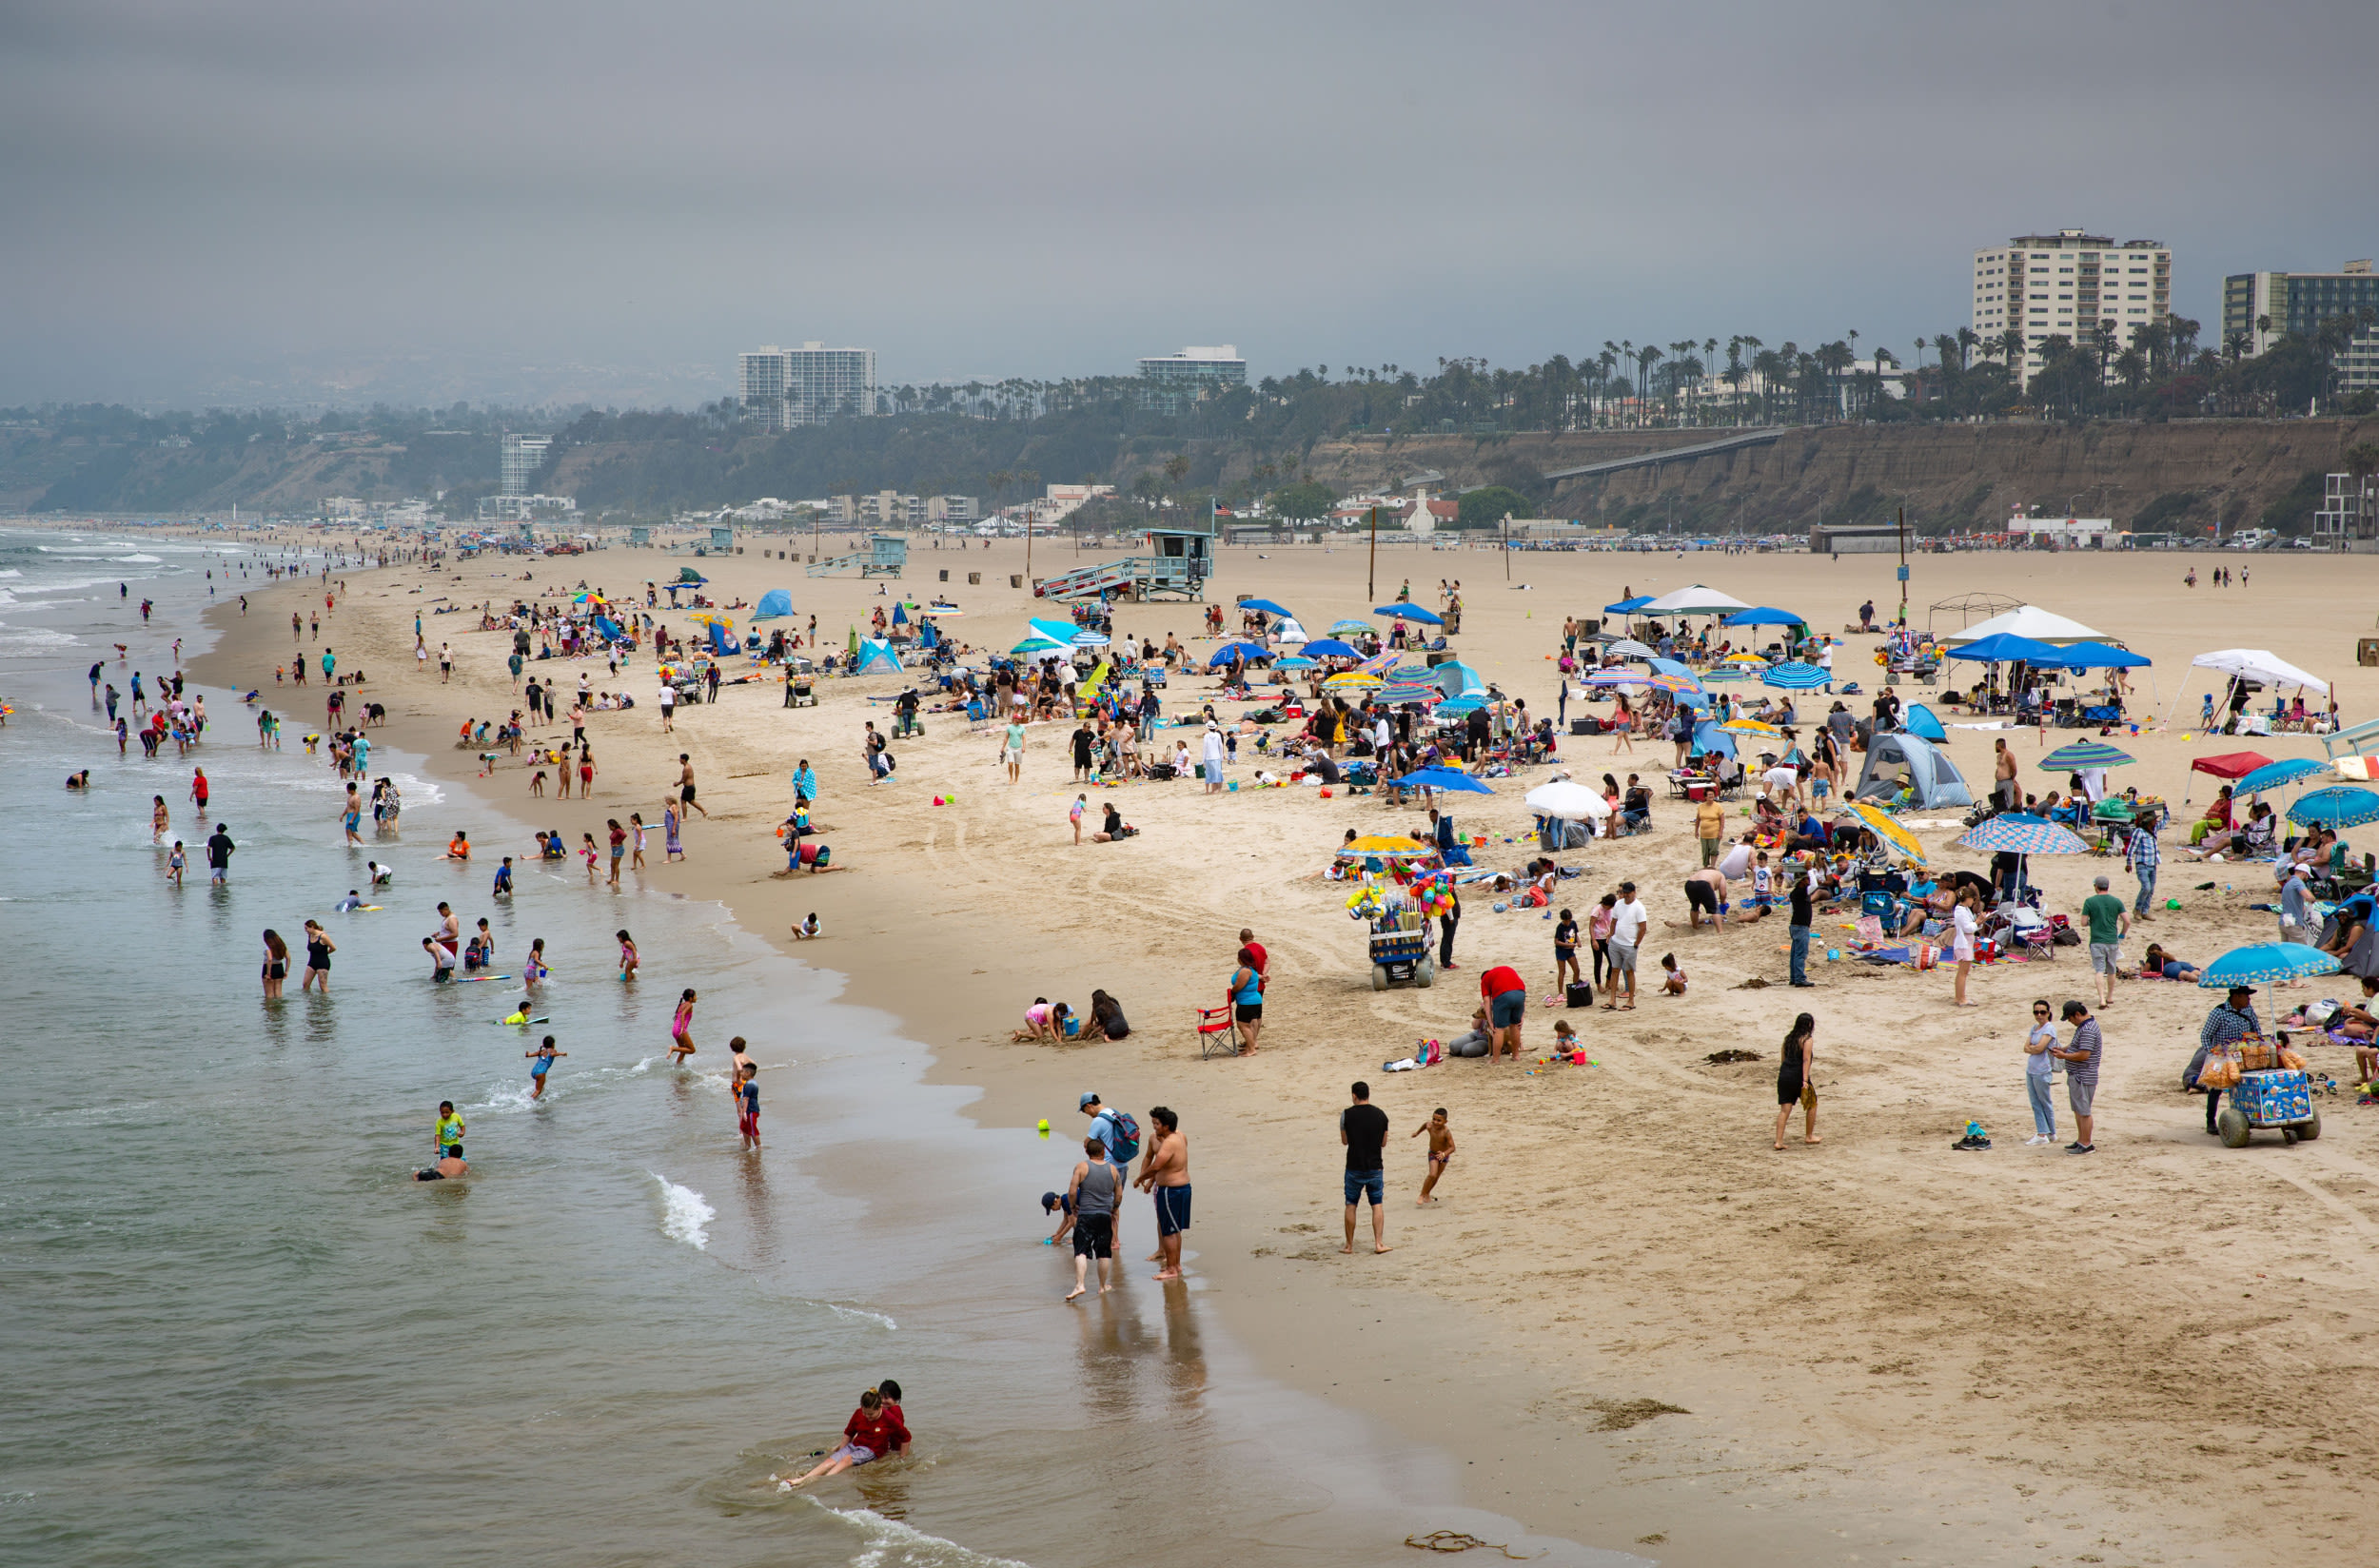 California beachgoers warned over water quality, bacterial levels